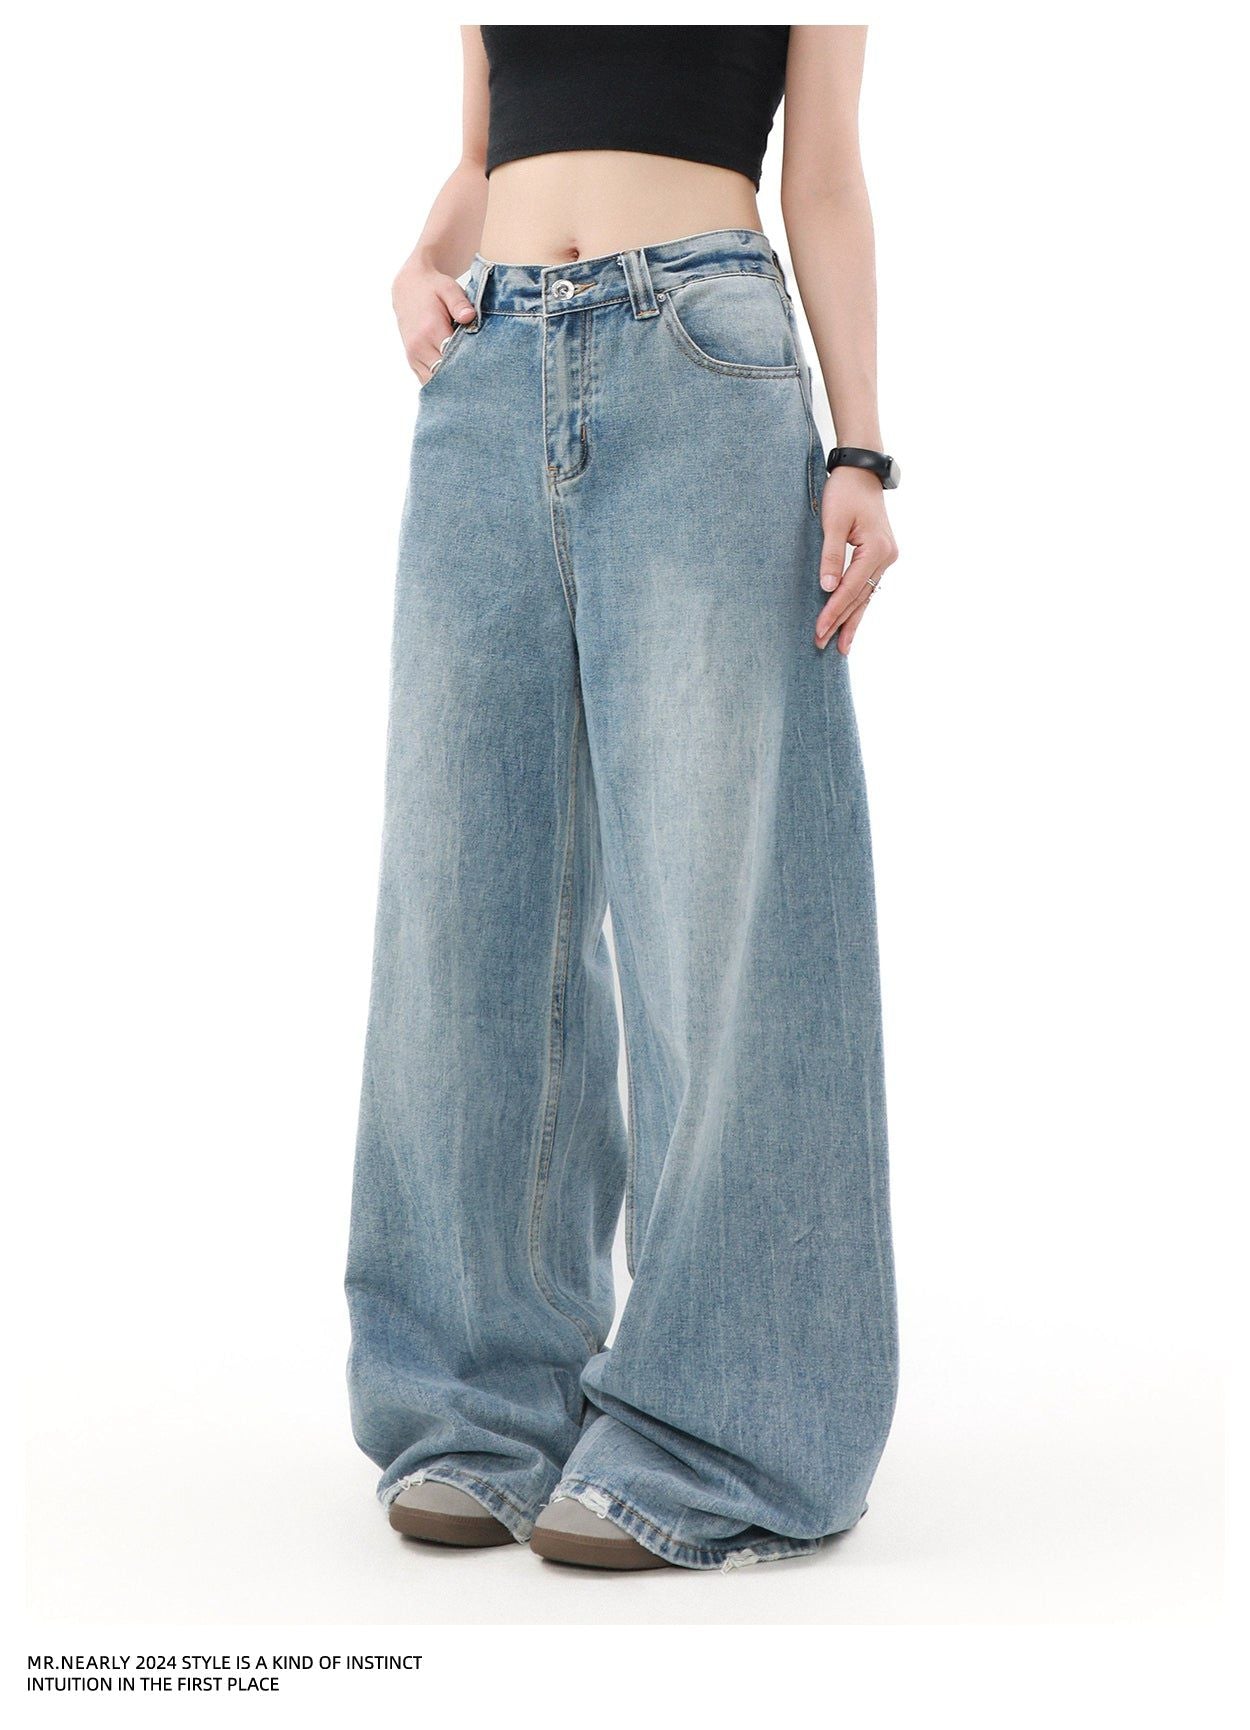 Faded Distressed Edge Jeans Korean Street Fashion Jeans By Mr Nearly Shop Online at OH Vault